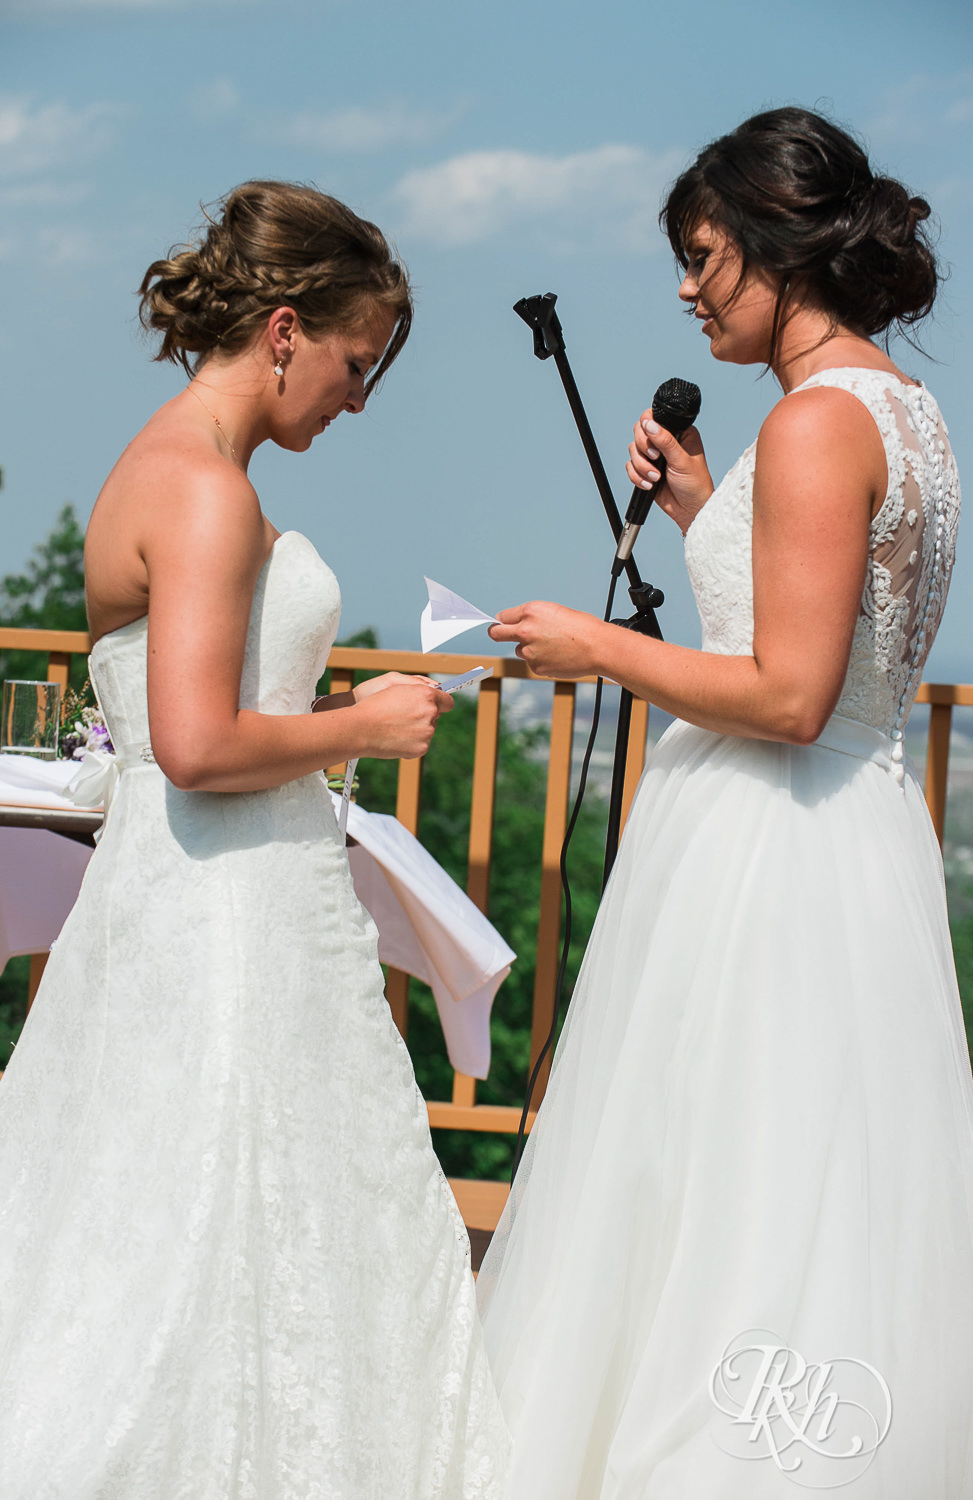 Lesbian brides read vows during outdoor ceremony at Spirit Mountain in Duluth, Minnesota.